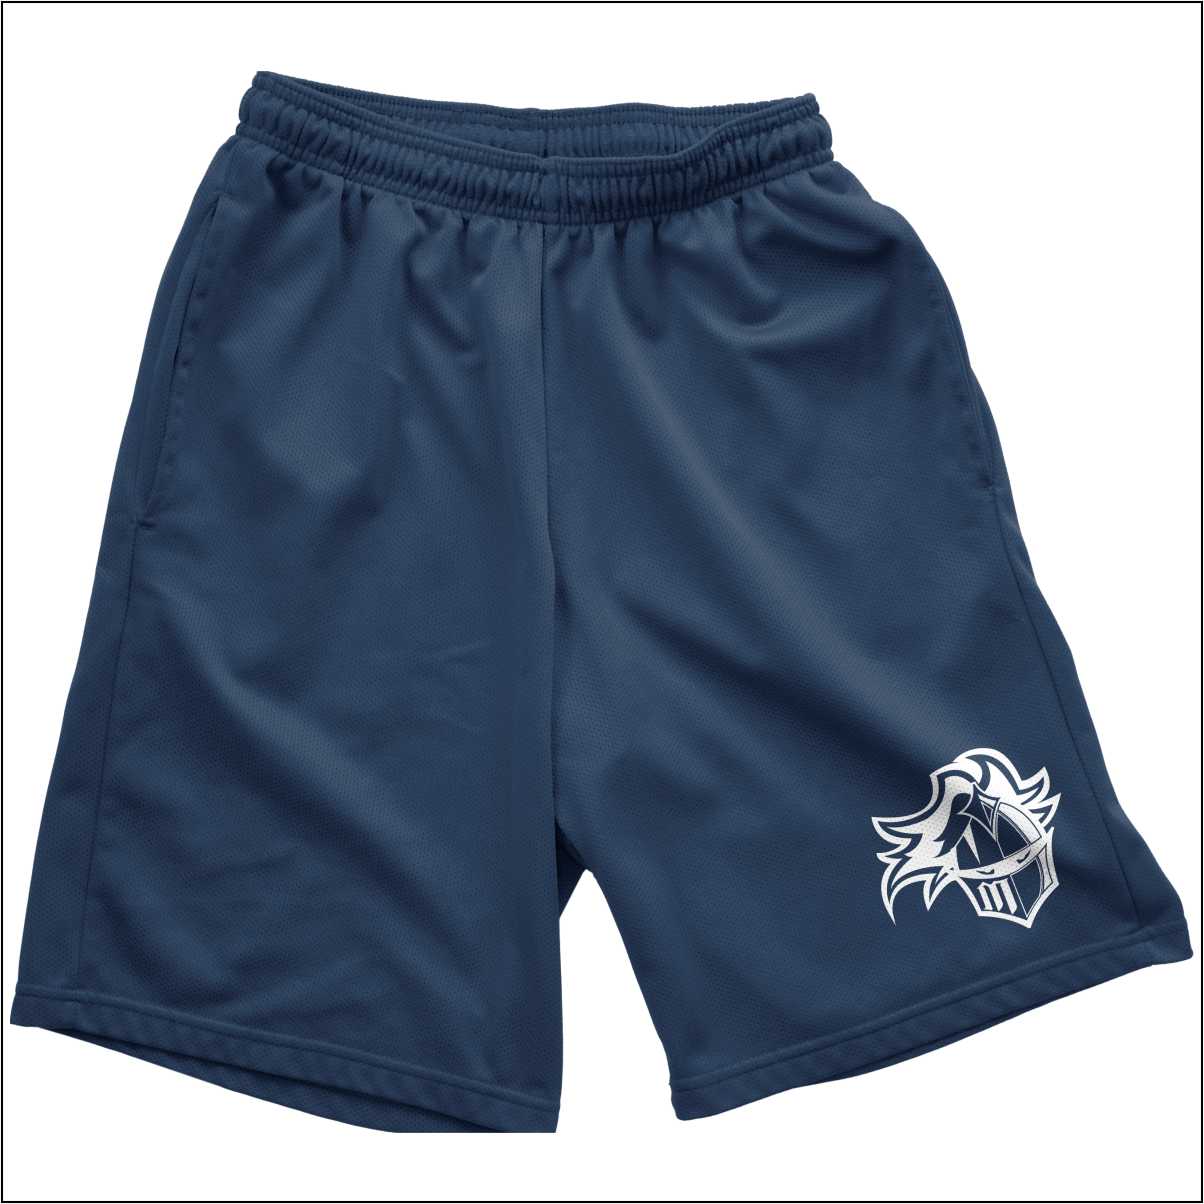 REQUIRED MCKAMY PE AND ATHLETIC SHORTS - FlipDog Sportswear